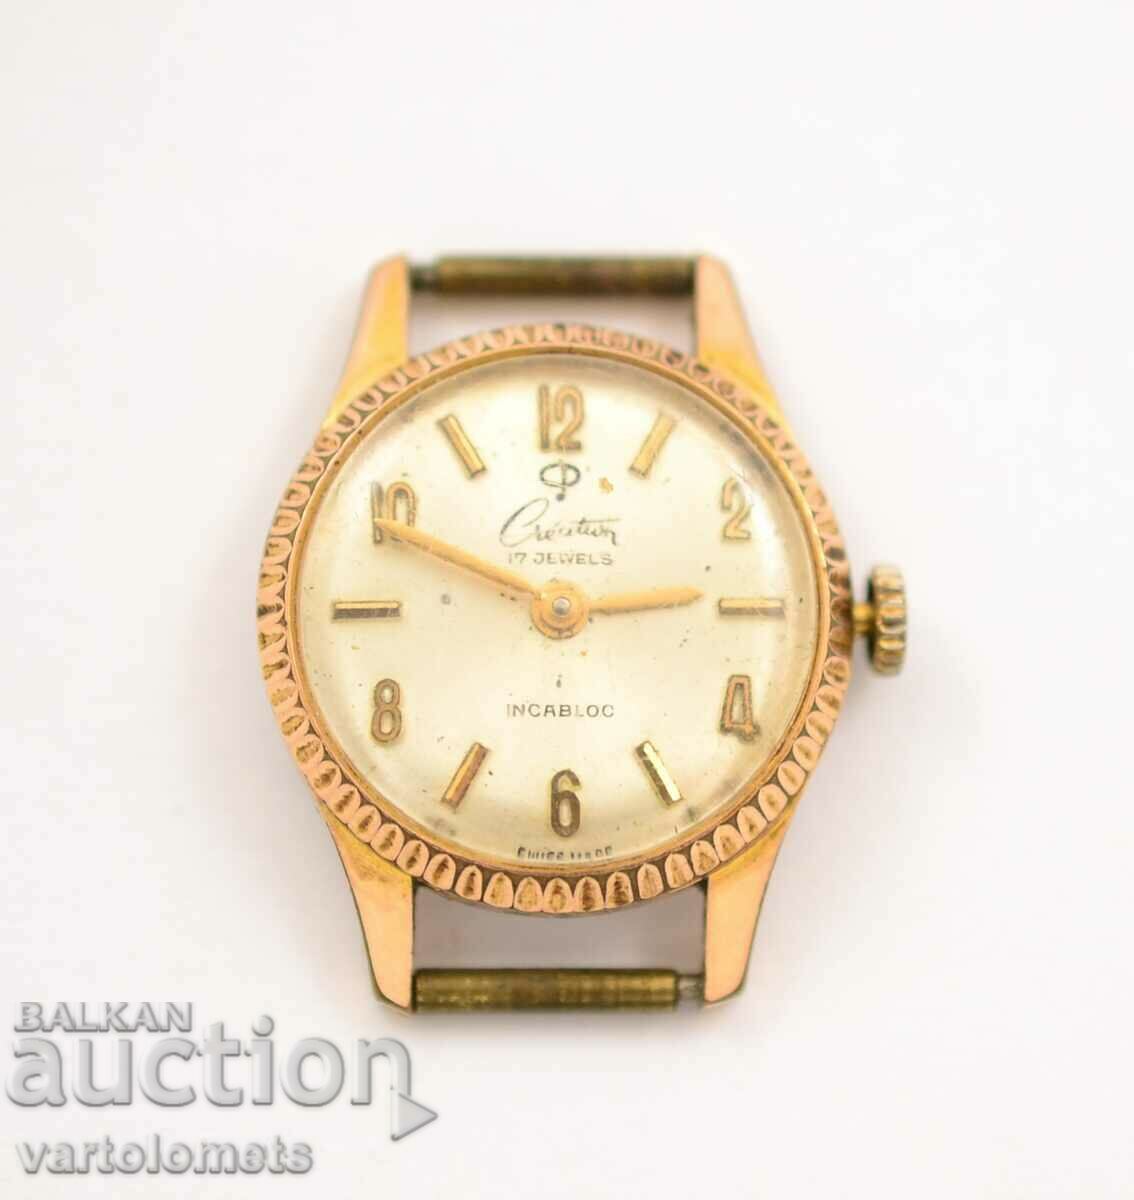 CREATION Women's Gold Plated Swiss msde Watch - Not Working